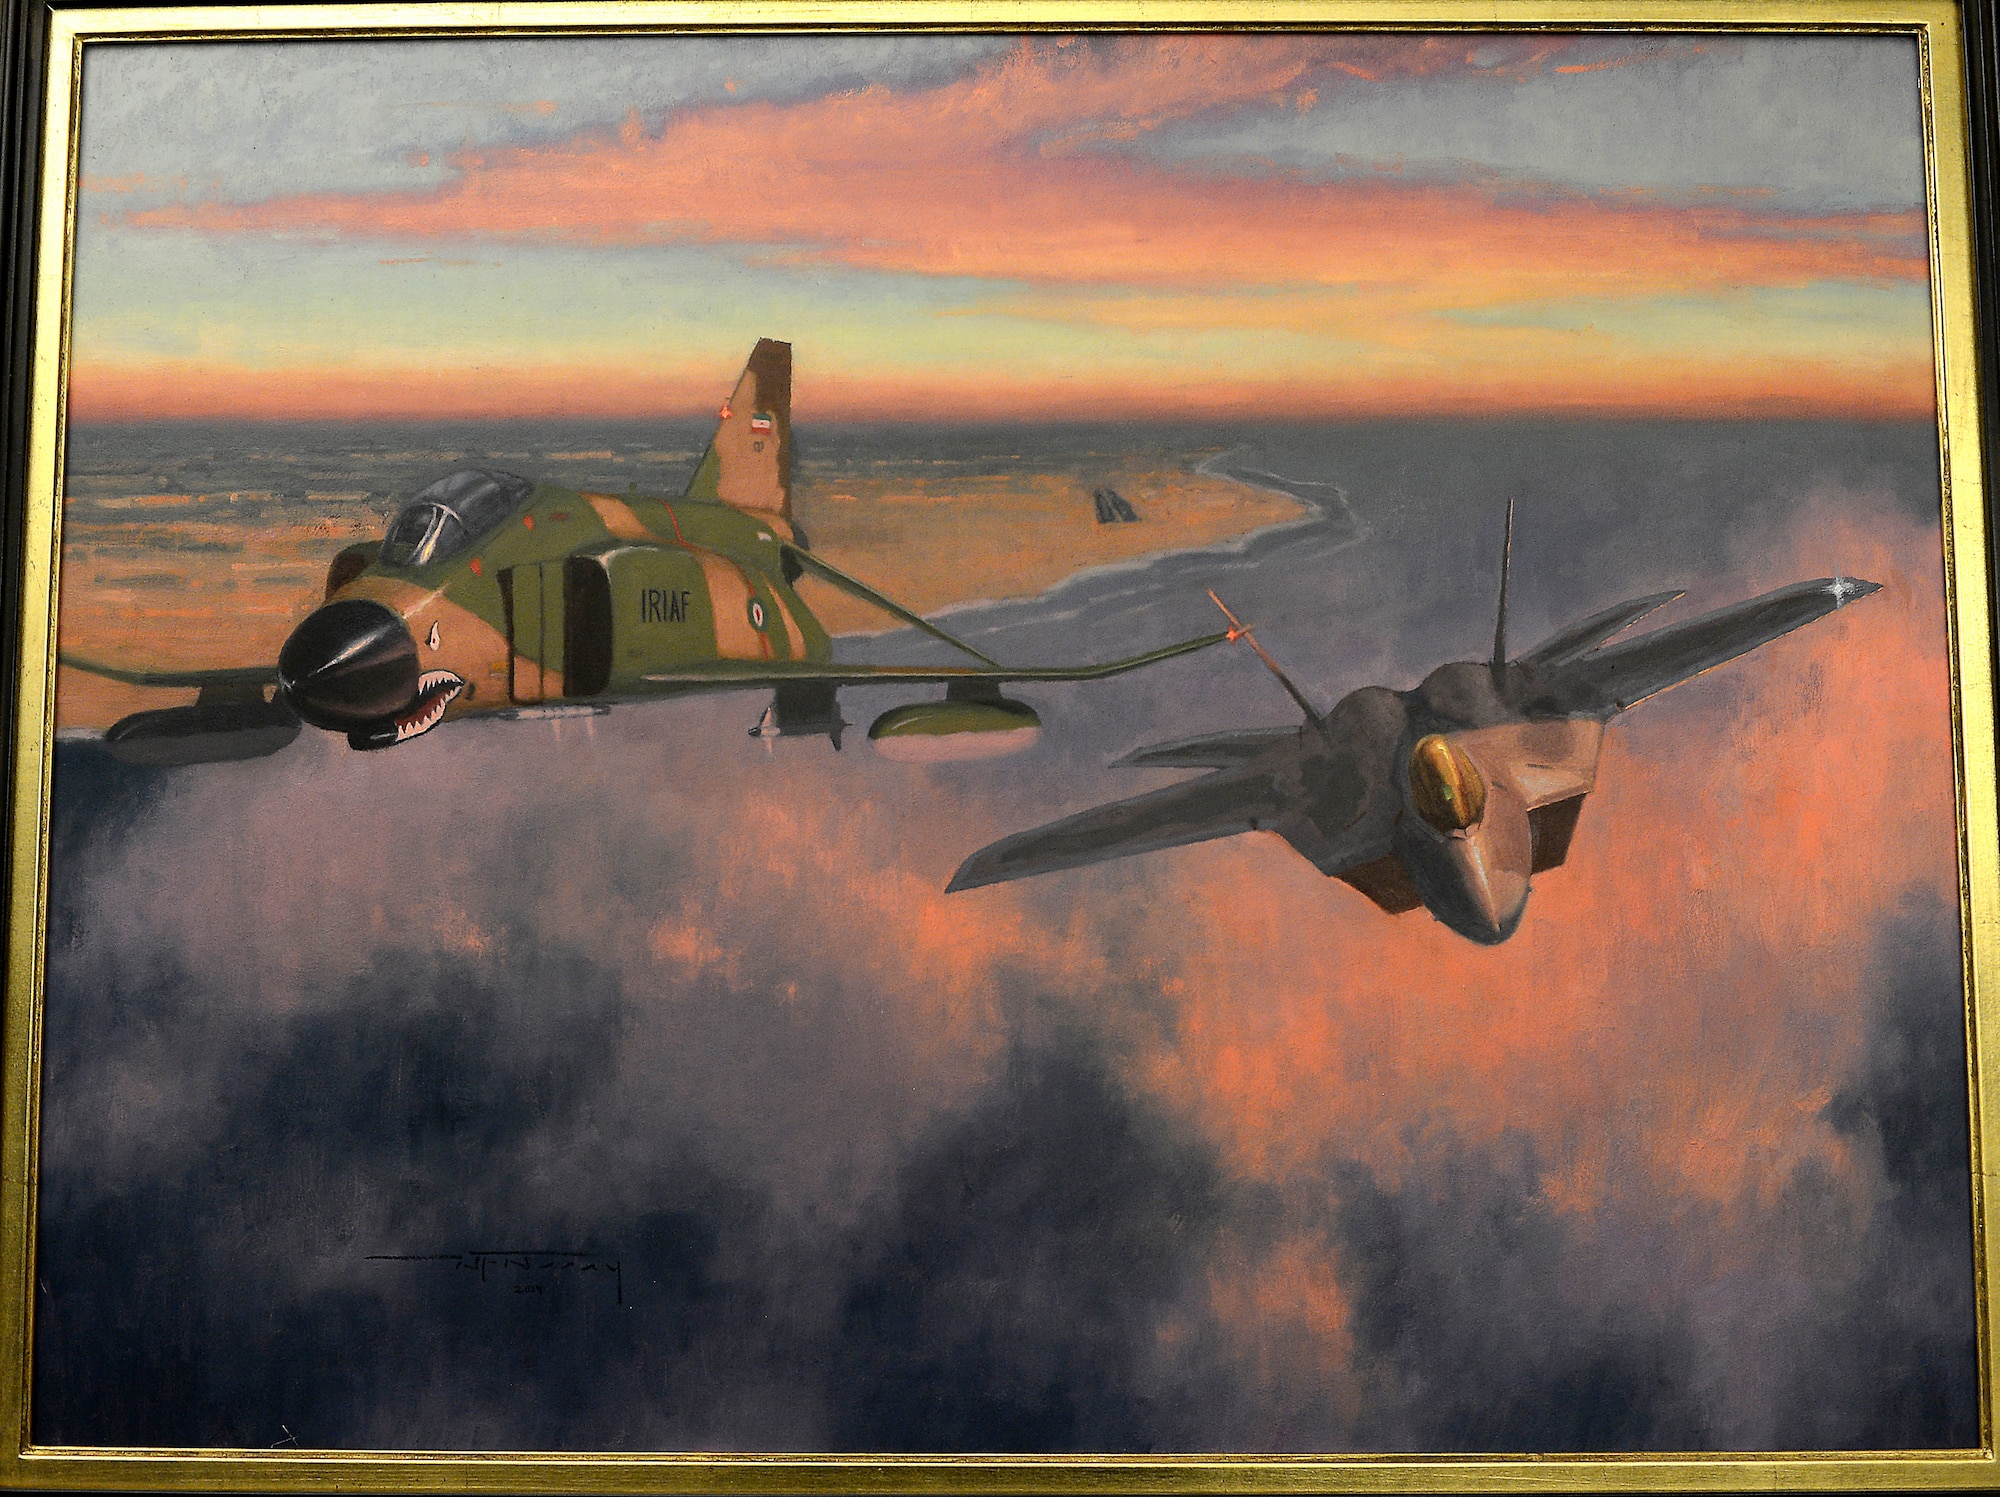 "Showtime" is a piece of art painted by Maj. Warren Neary, and was presented to Air Force Chief of Staff Gen. Mark A. Welsh III June 20, 2014, in the Pentagon.  Neary is a U.S. Air Force Reserve historian and contributed "Showtime" and another work, titled "Bandage 33," through the Air Force Art Program. (U.S. Air Force photo/Scott M. Ash)